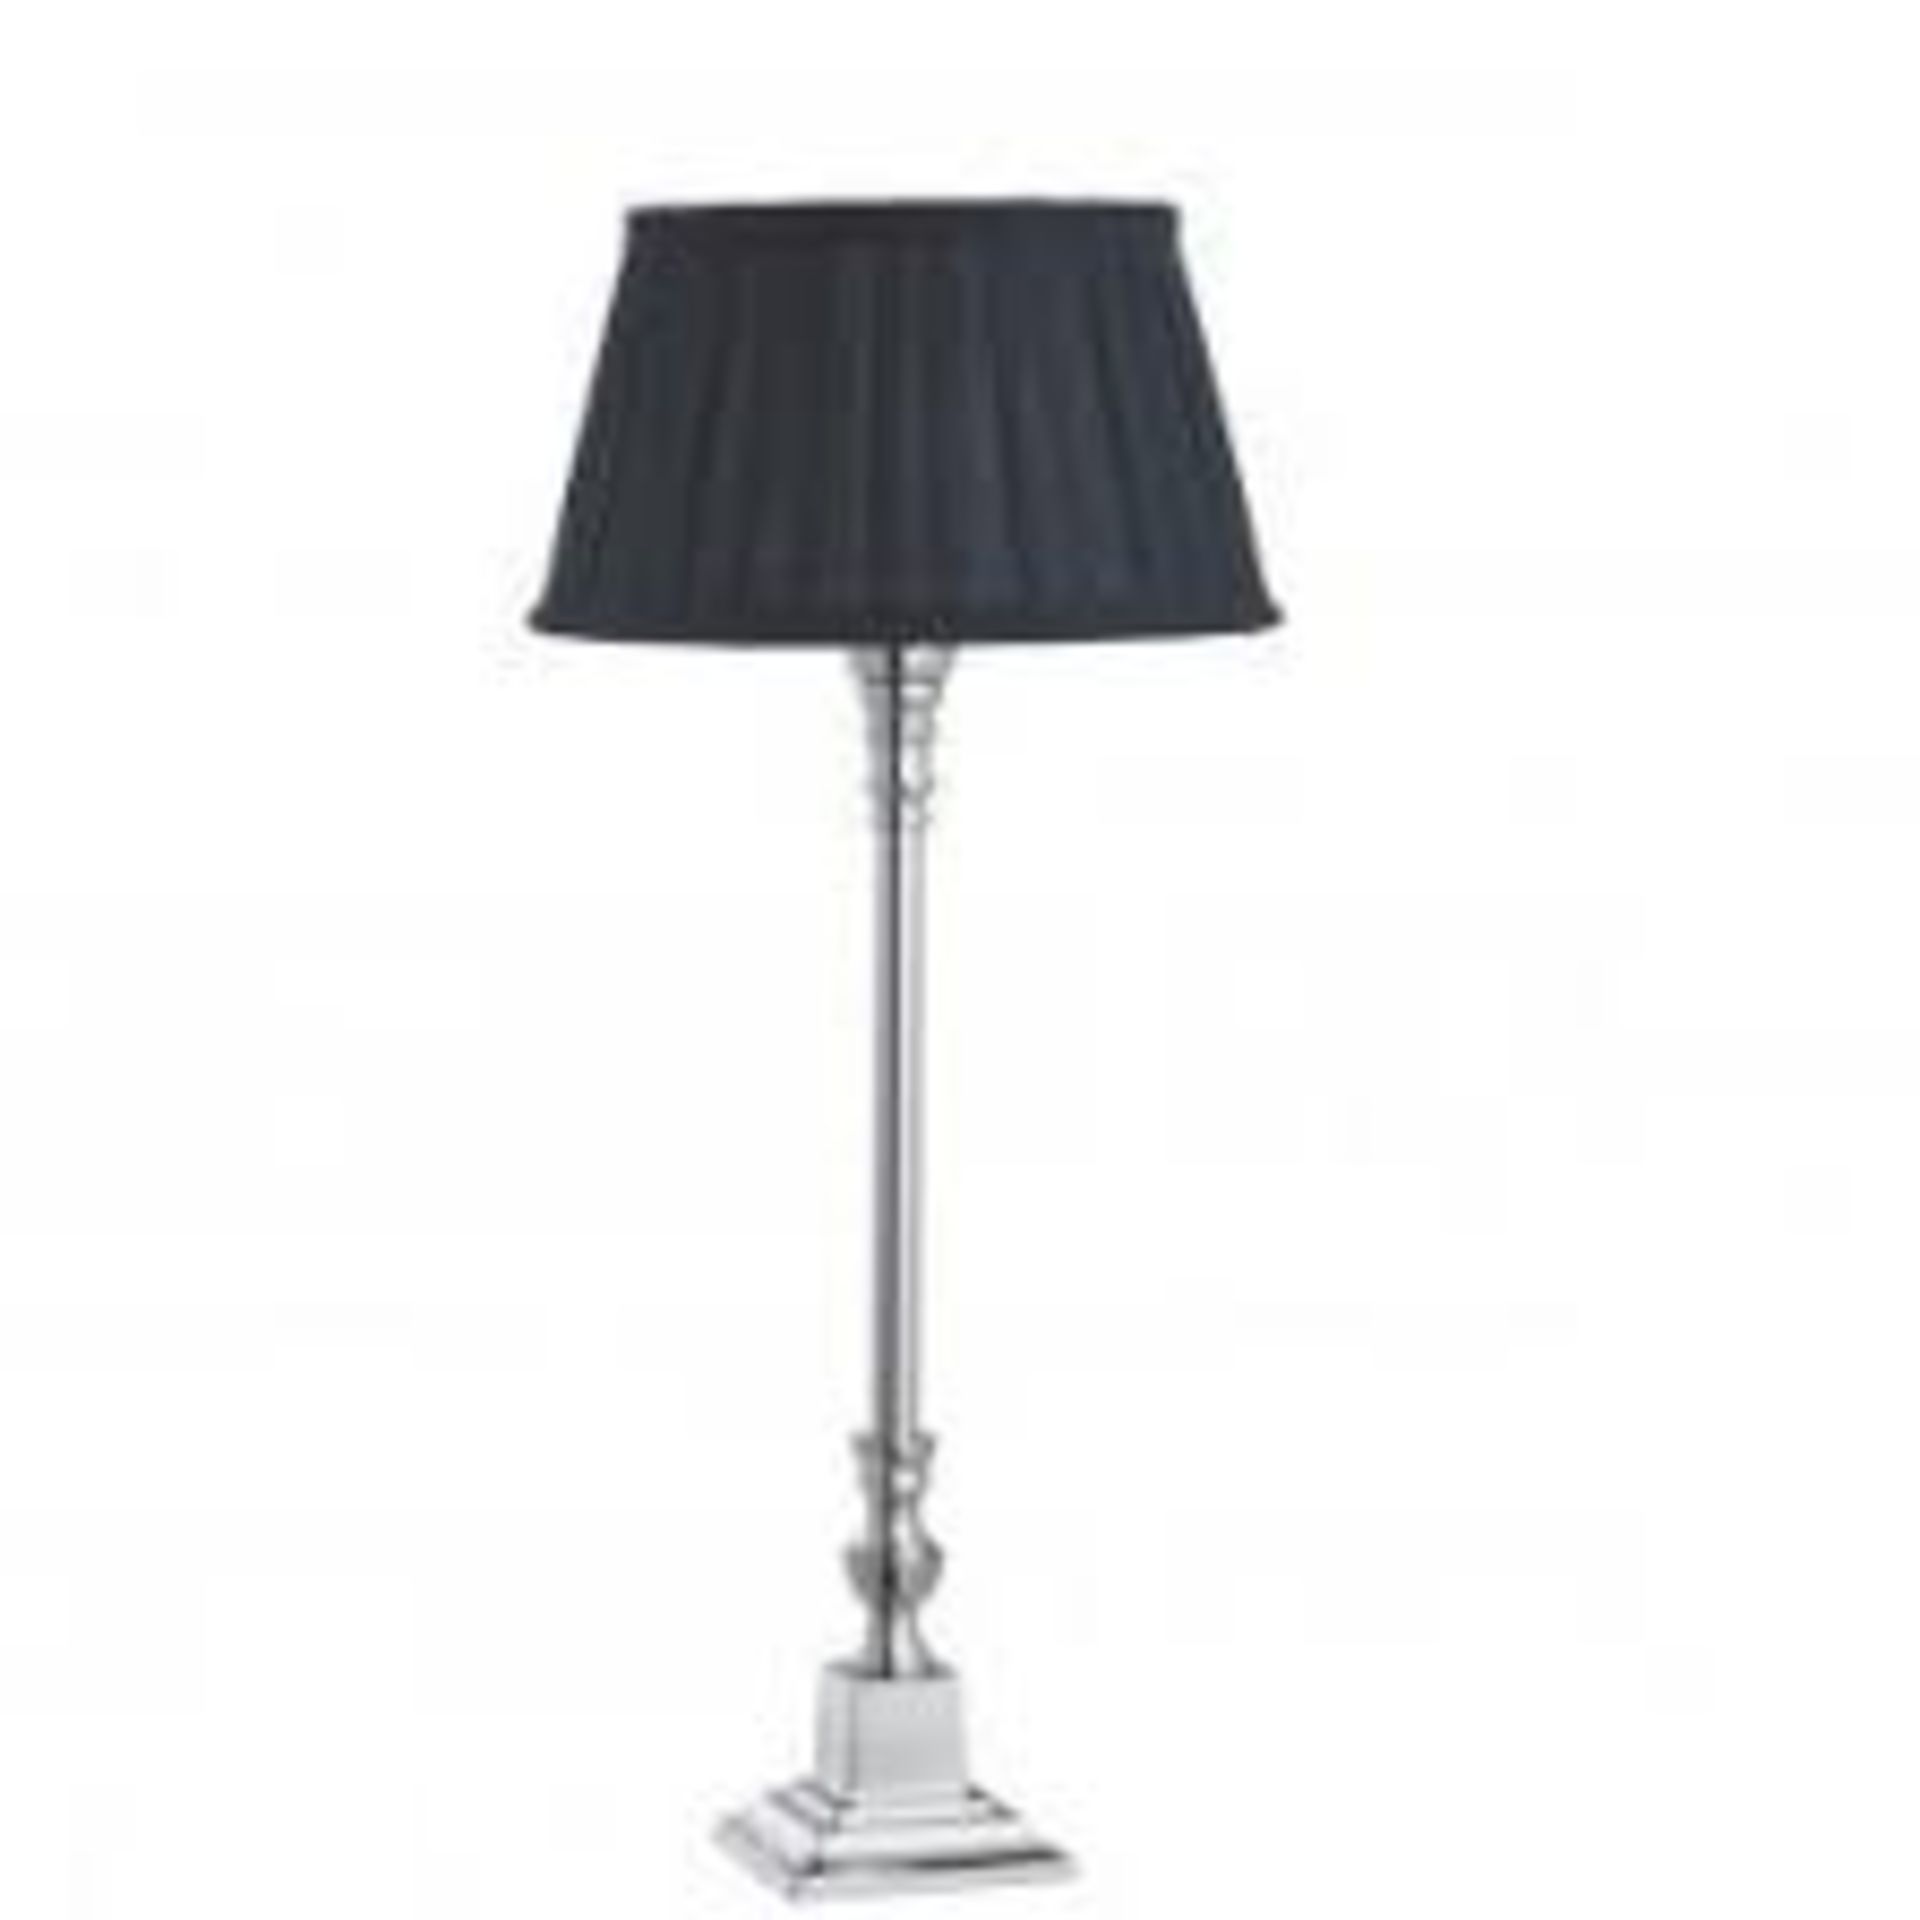 1 x Searchlight Medium Table Lamp in chrome - Ref: 8173CC - New and Boxed - RRP: £90.00 - Image 2 of 4